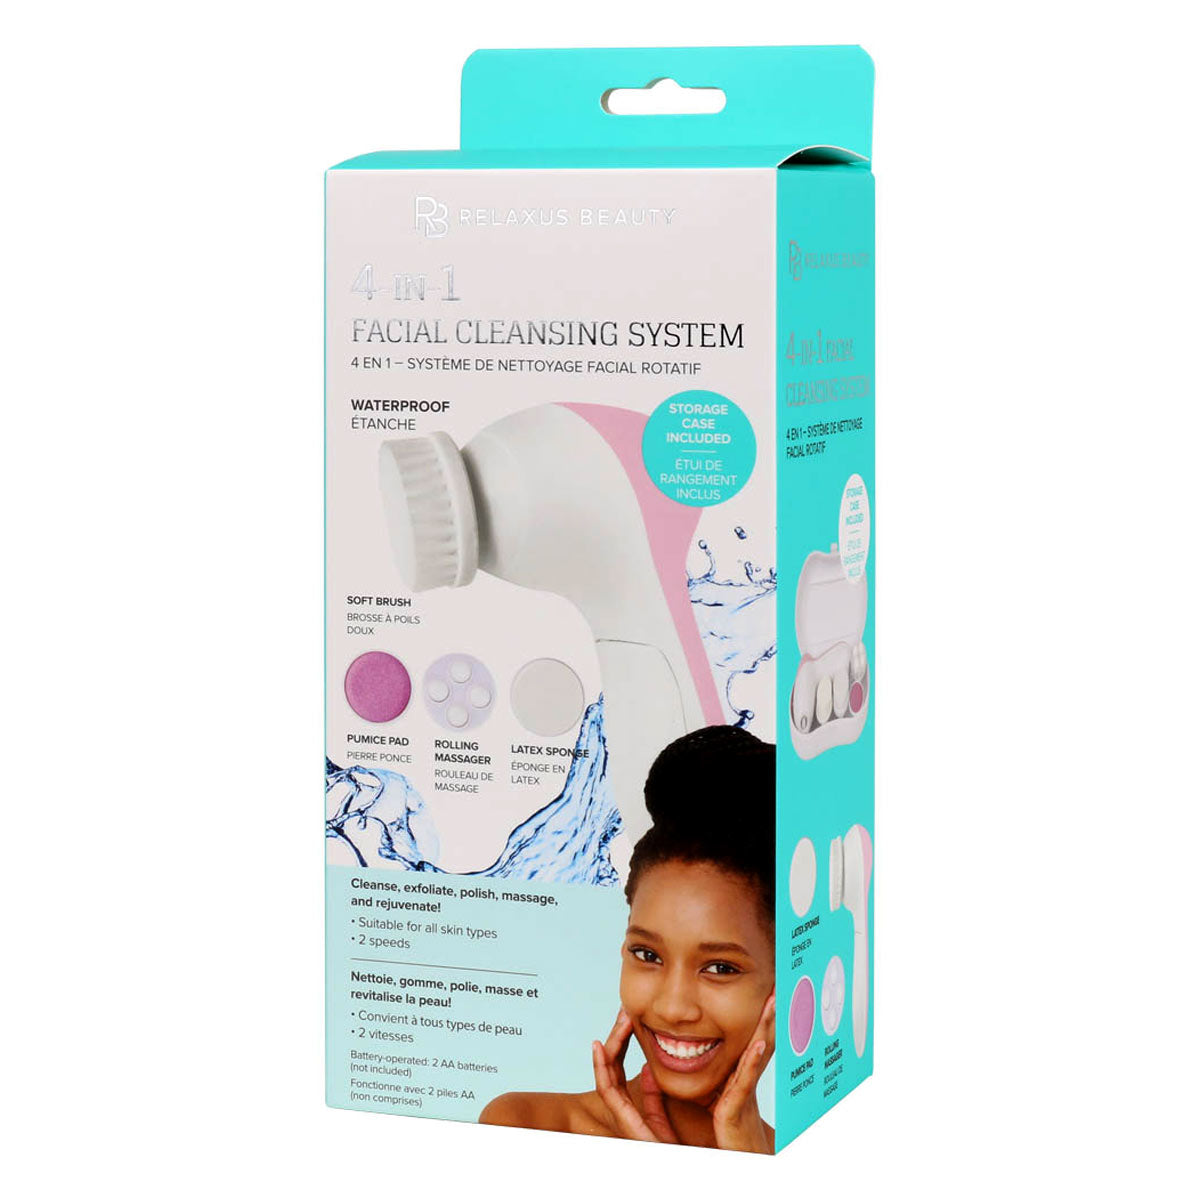 Relaxus Beauty 4-in-1 Facial Cleansing System